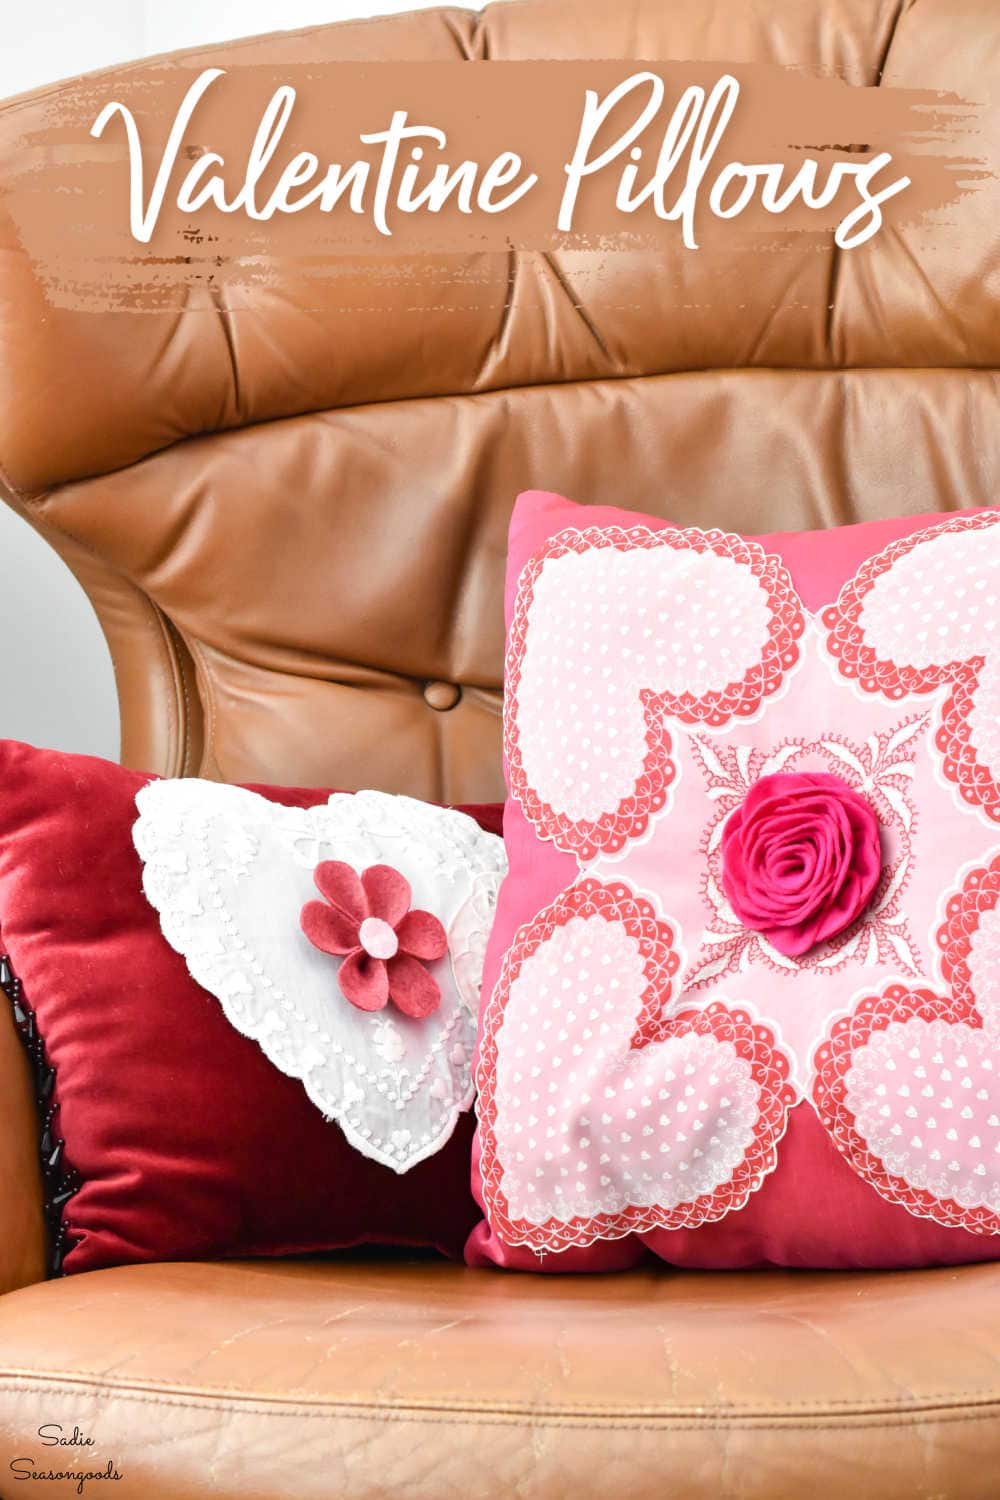 february decorations with valentines day pillows